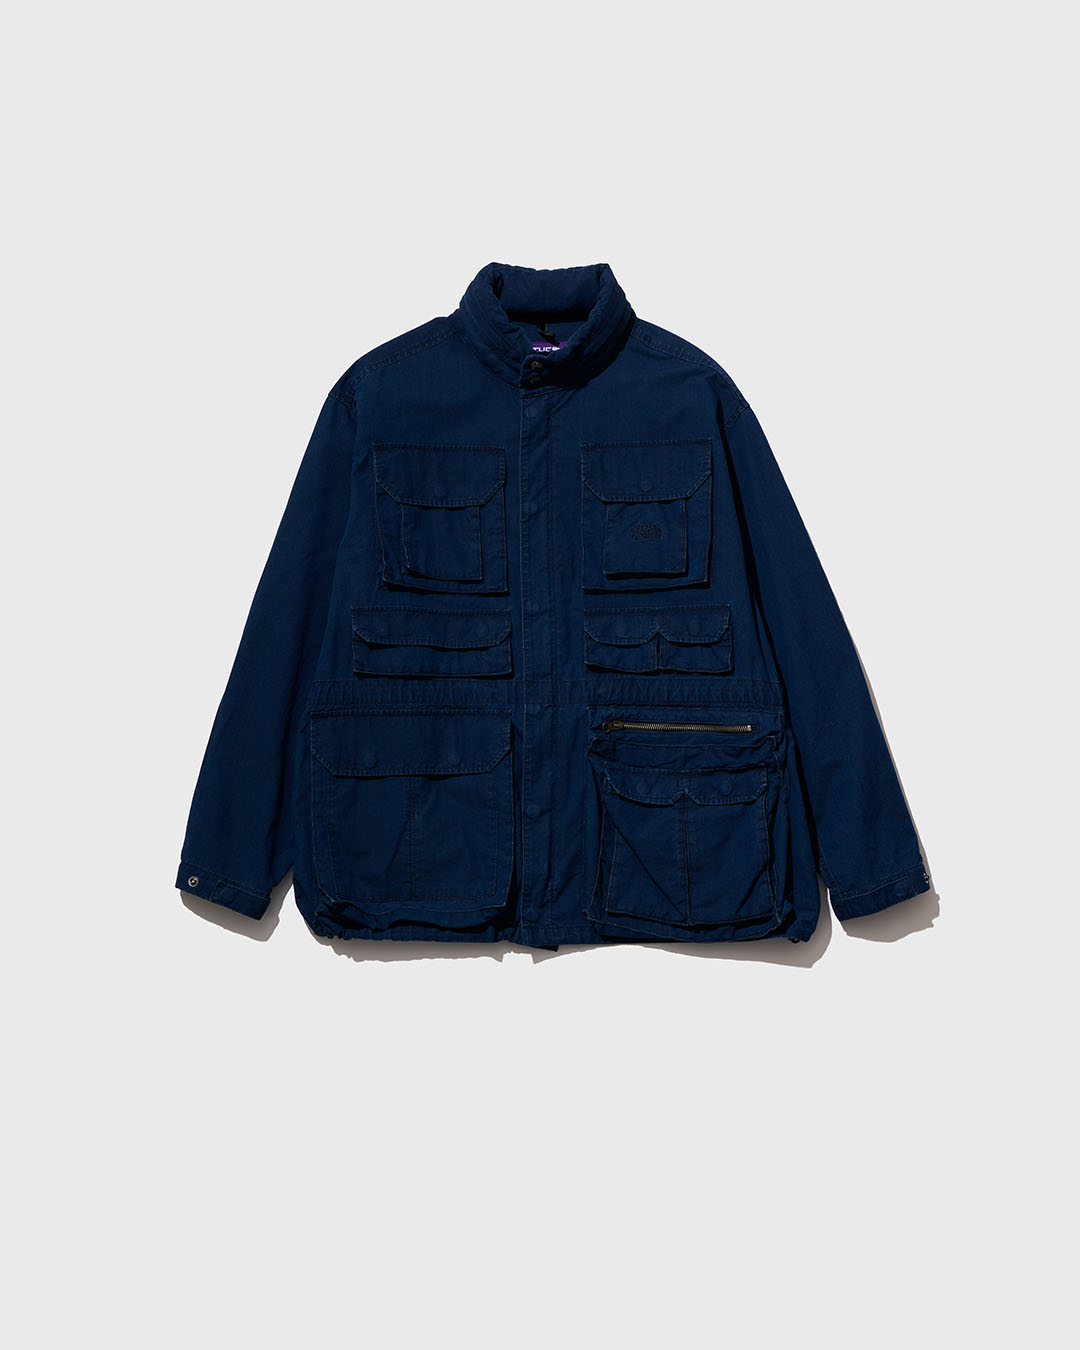 nanamica / THE NORTH FACE PURPLE LABEL / Featured Product vol.47